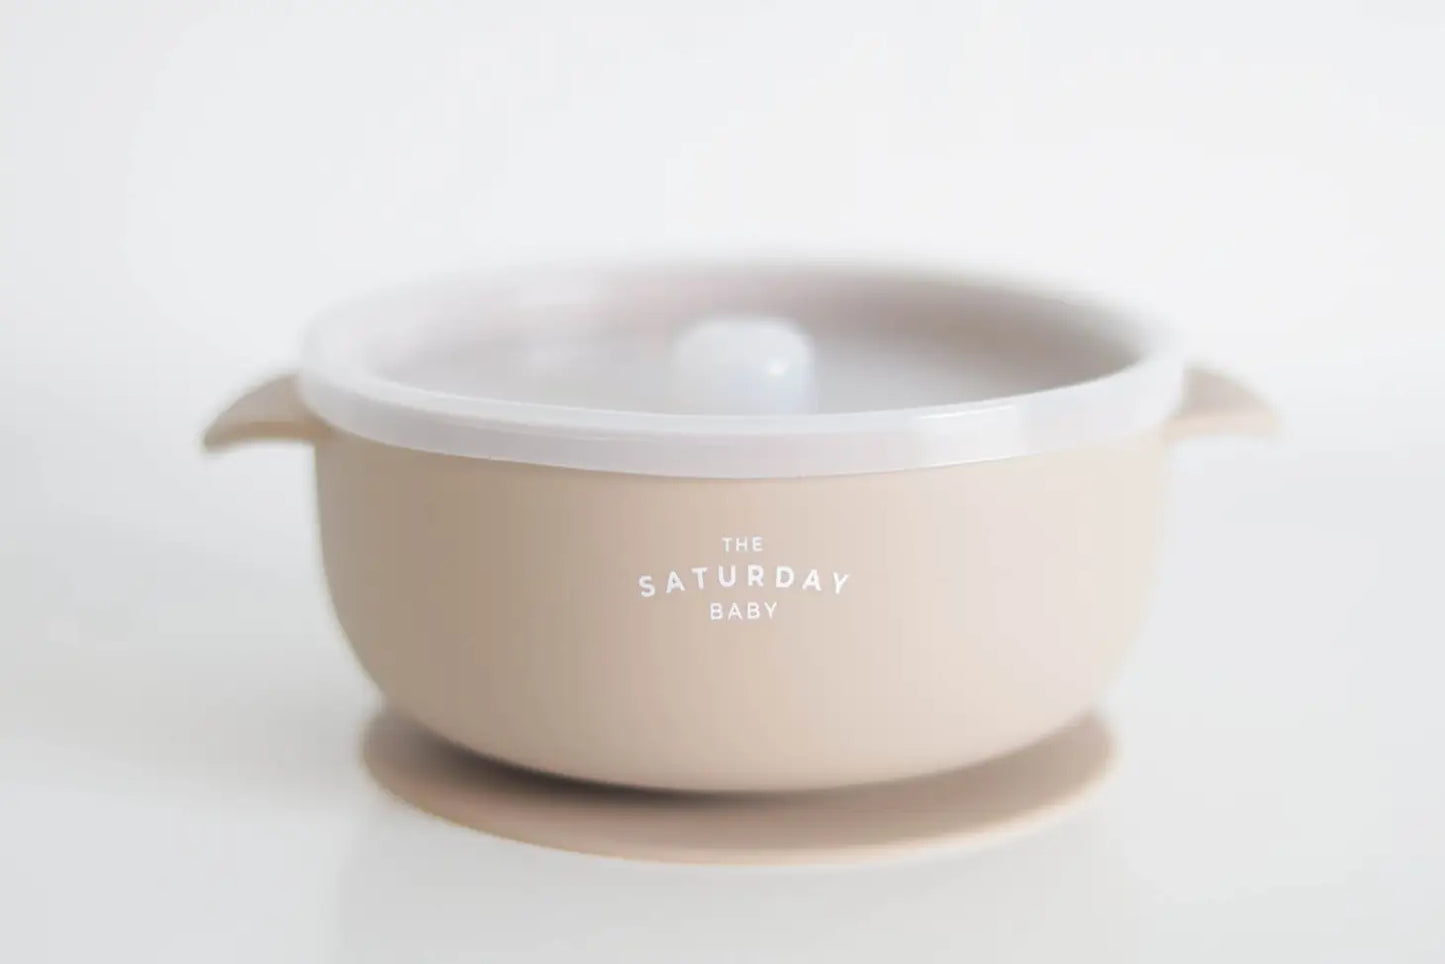 Suction Bowl With Lid